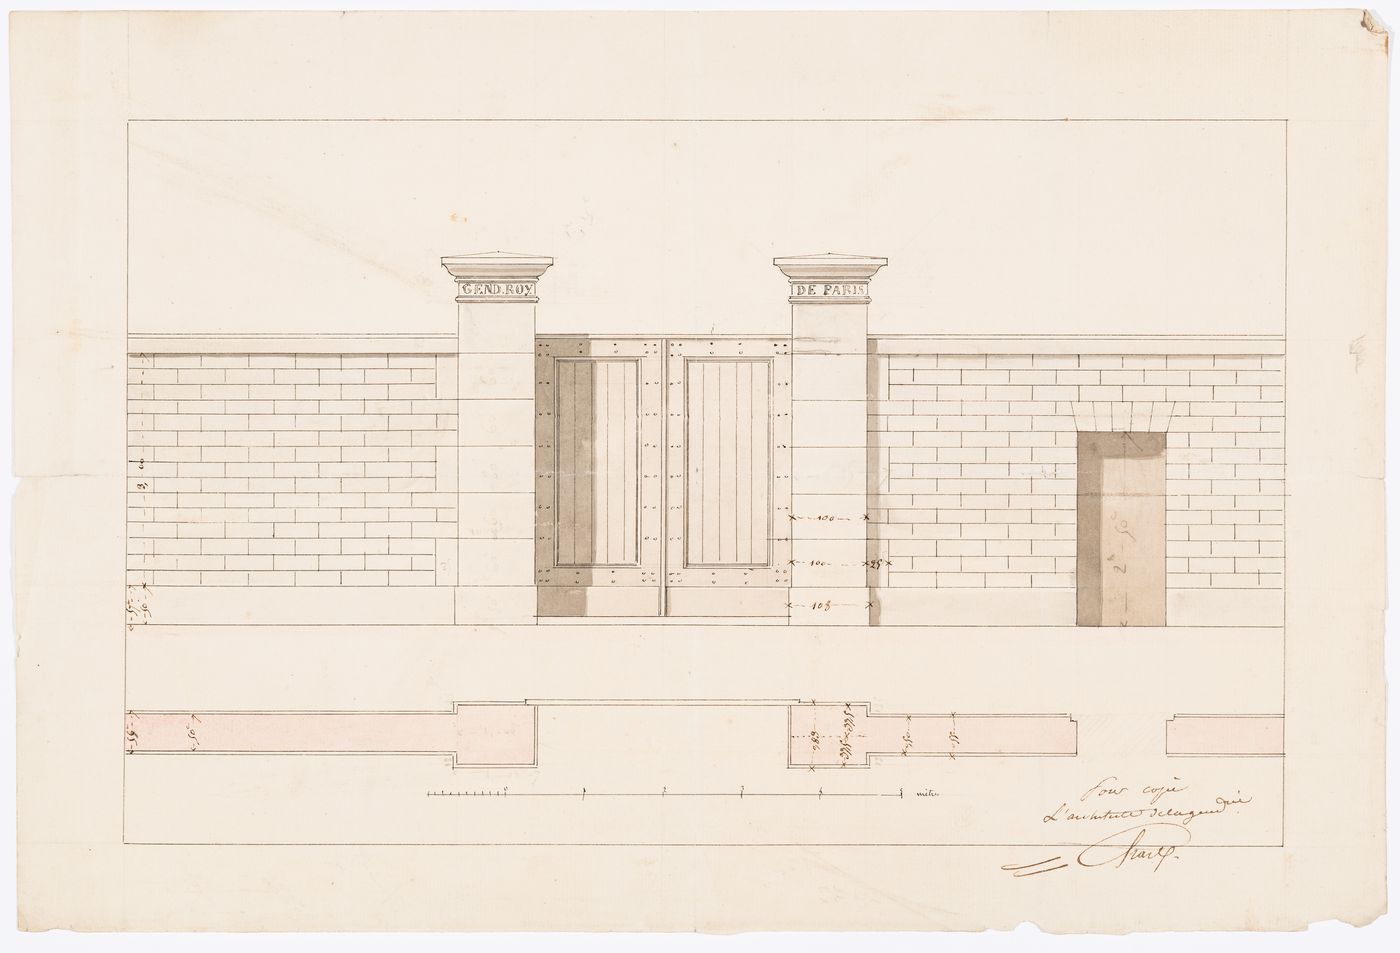 Project for alterations to the Caserne des Minimes, rue des Minimes: Elevation and plan for an entrance gateway